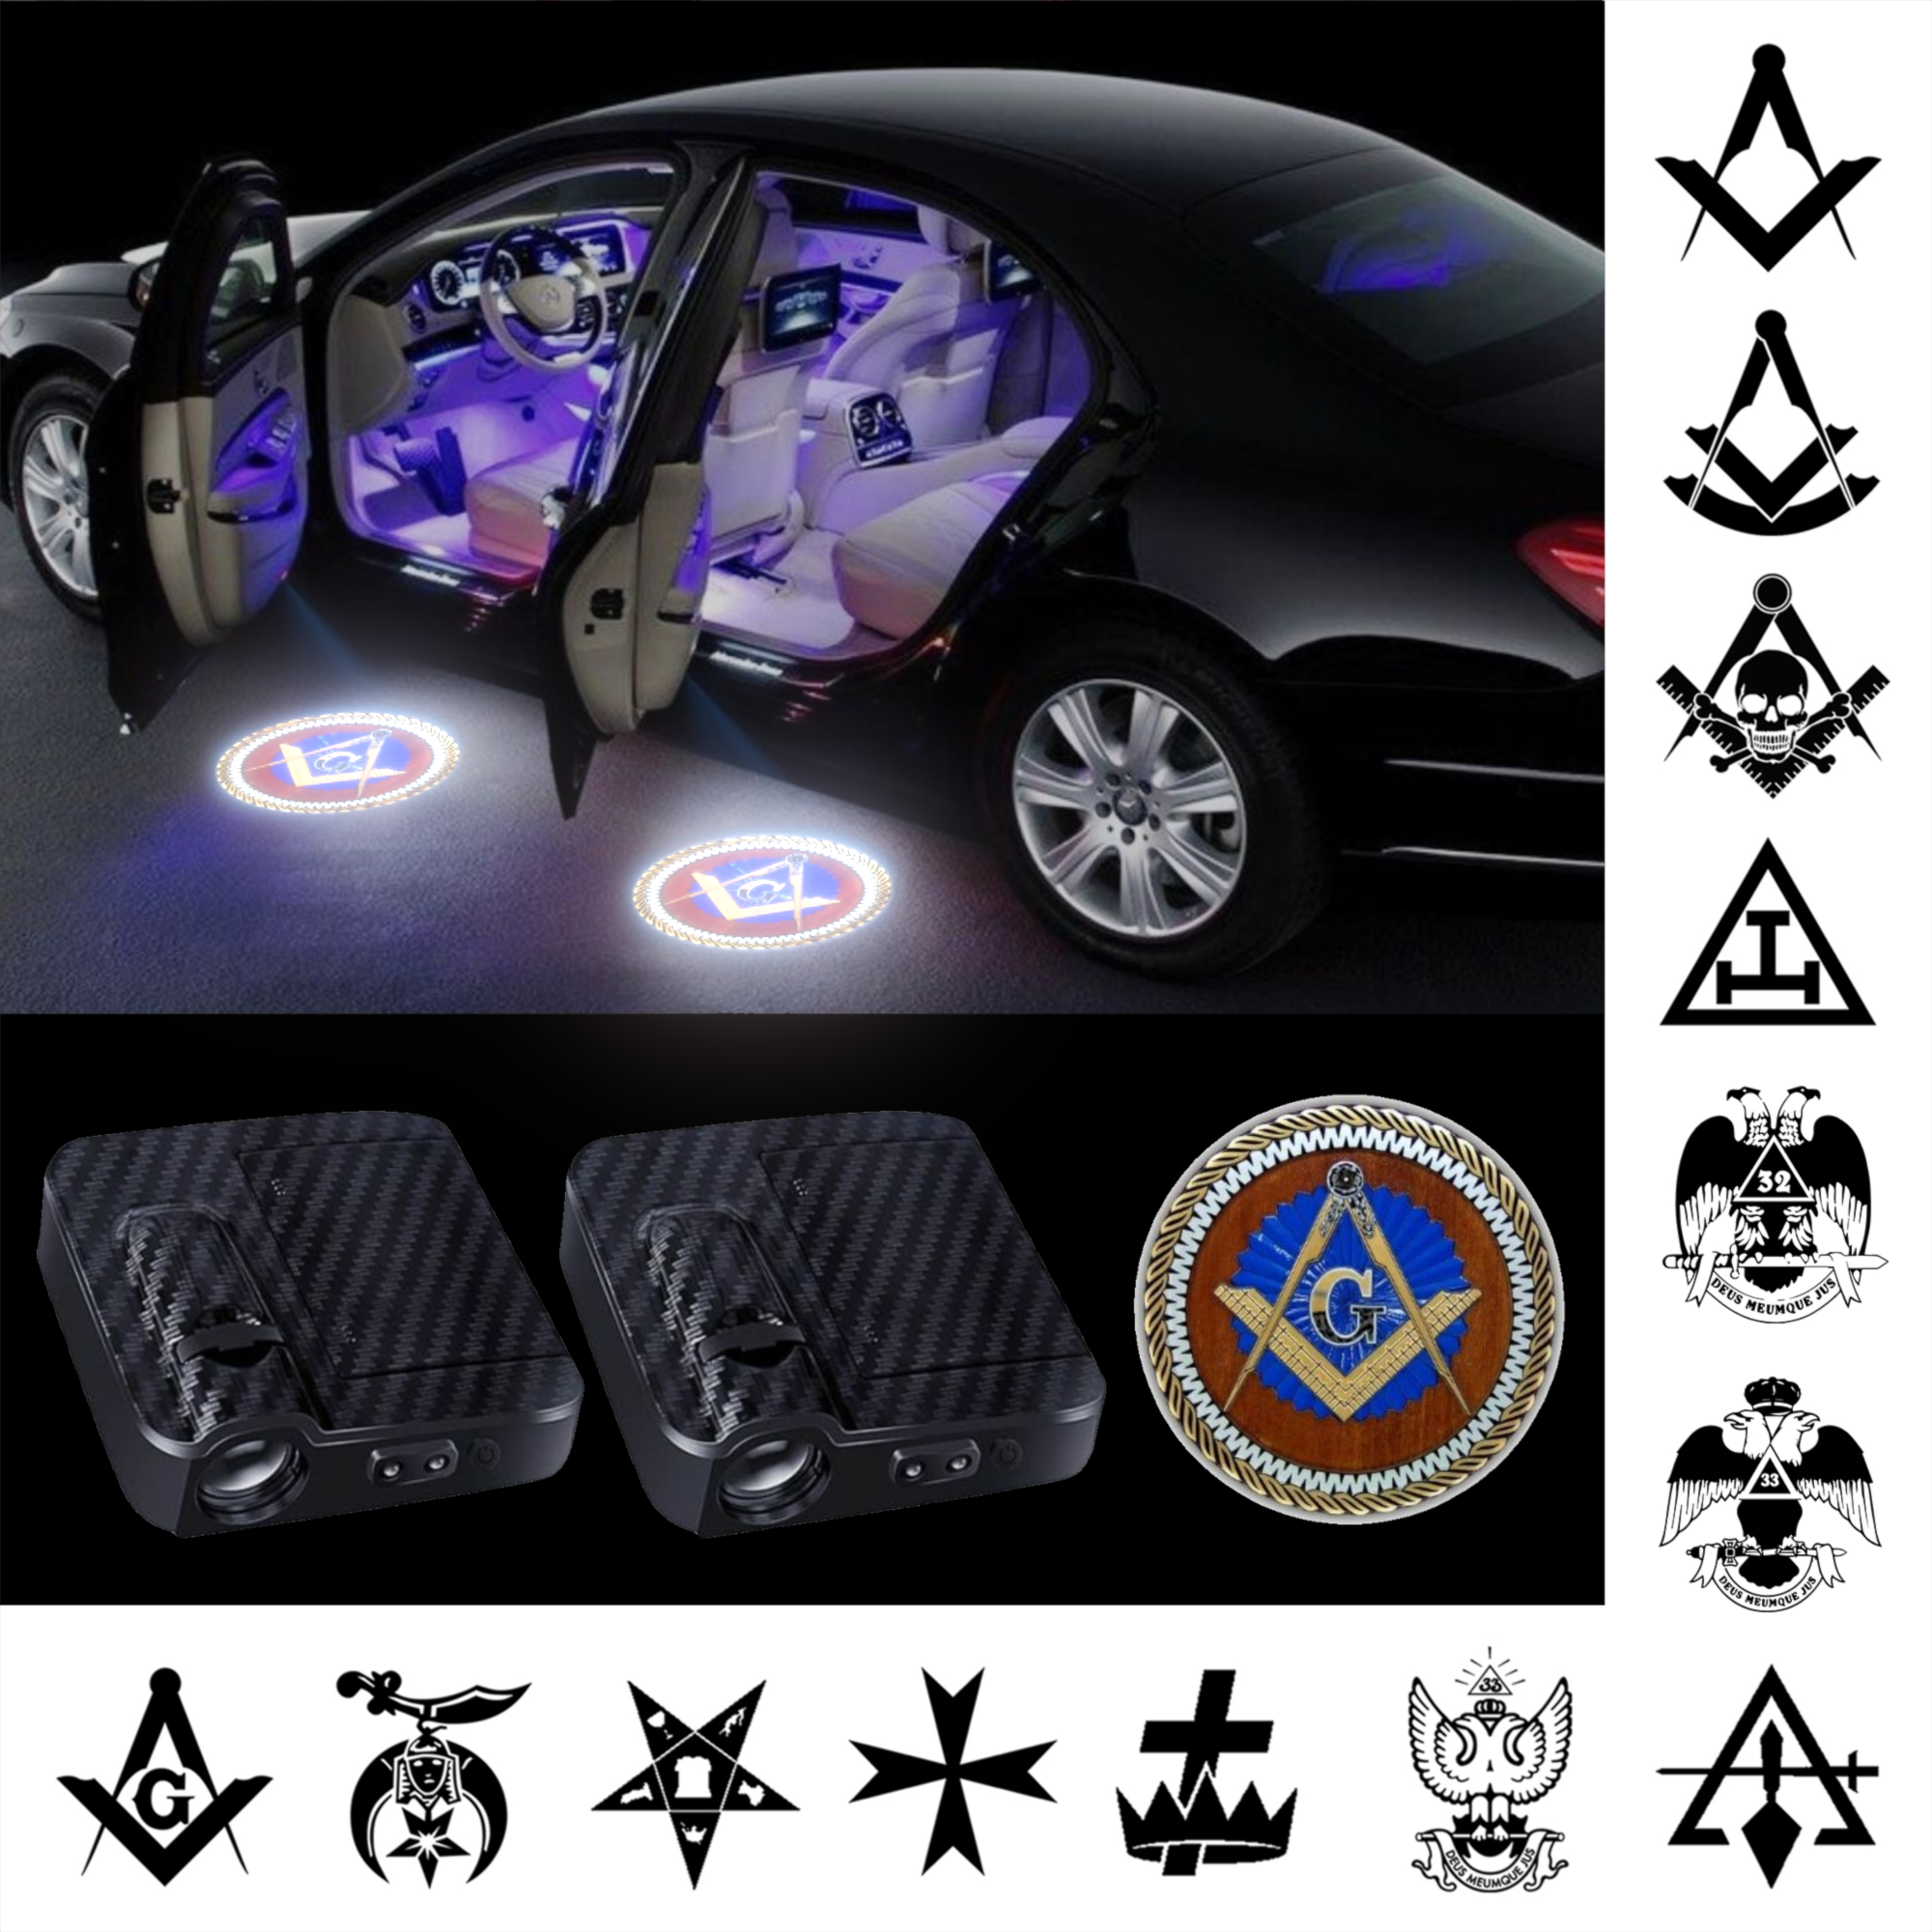 2 Pieces Masonic Wireless LED Car Door Welcome Light Projector